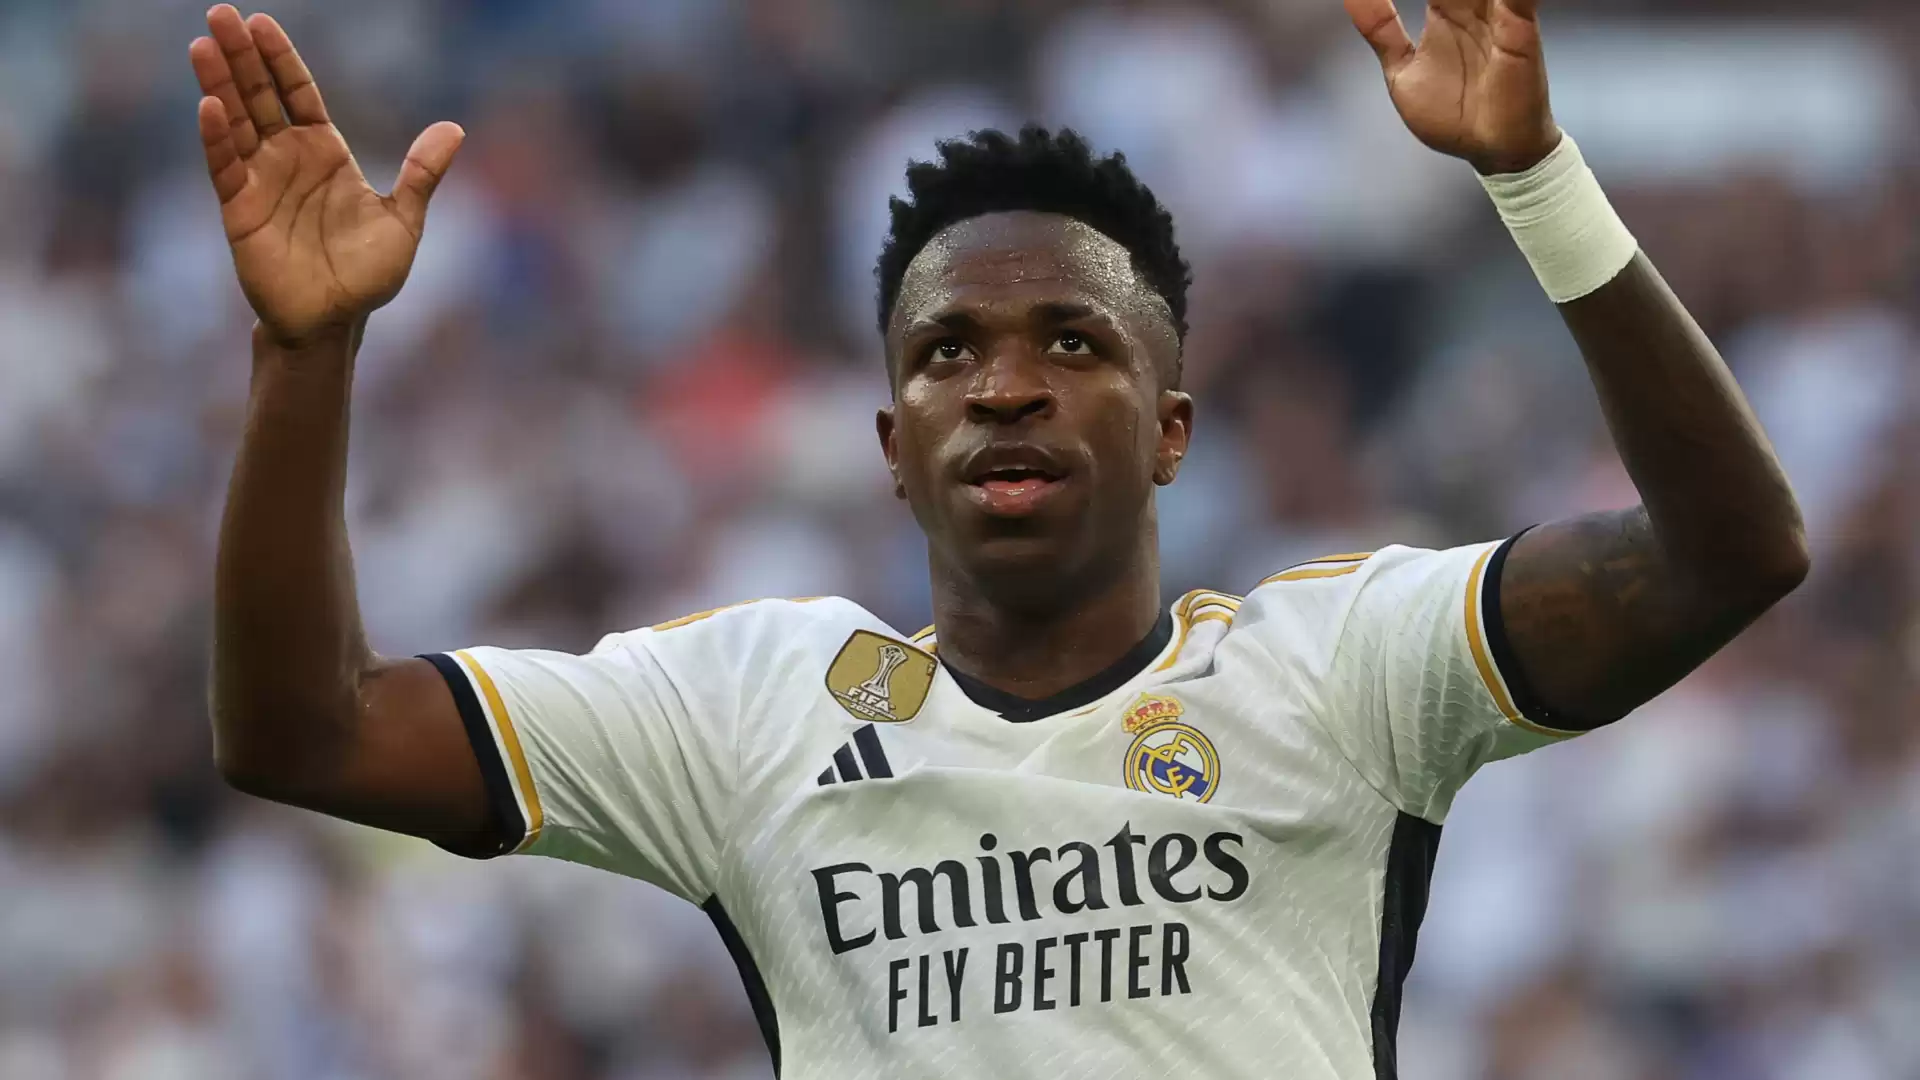 La Liga Investigating Alleged Racial Abuse Targeting Real Madrid Star Vinicius Jr During Clasico Win at Barcelona